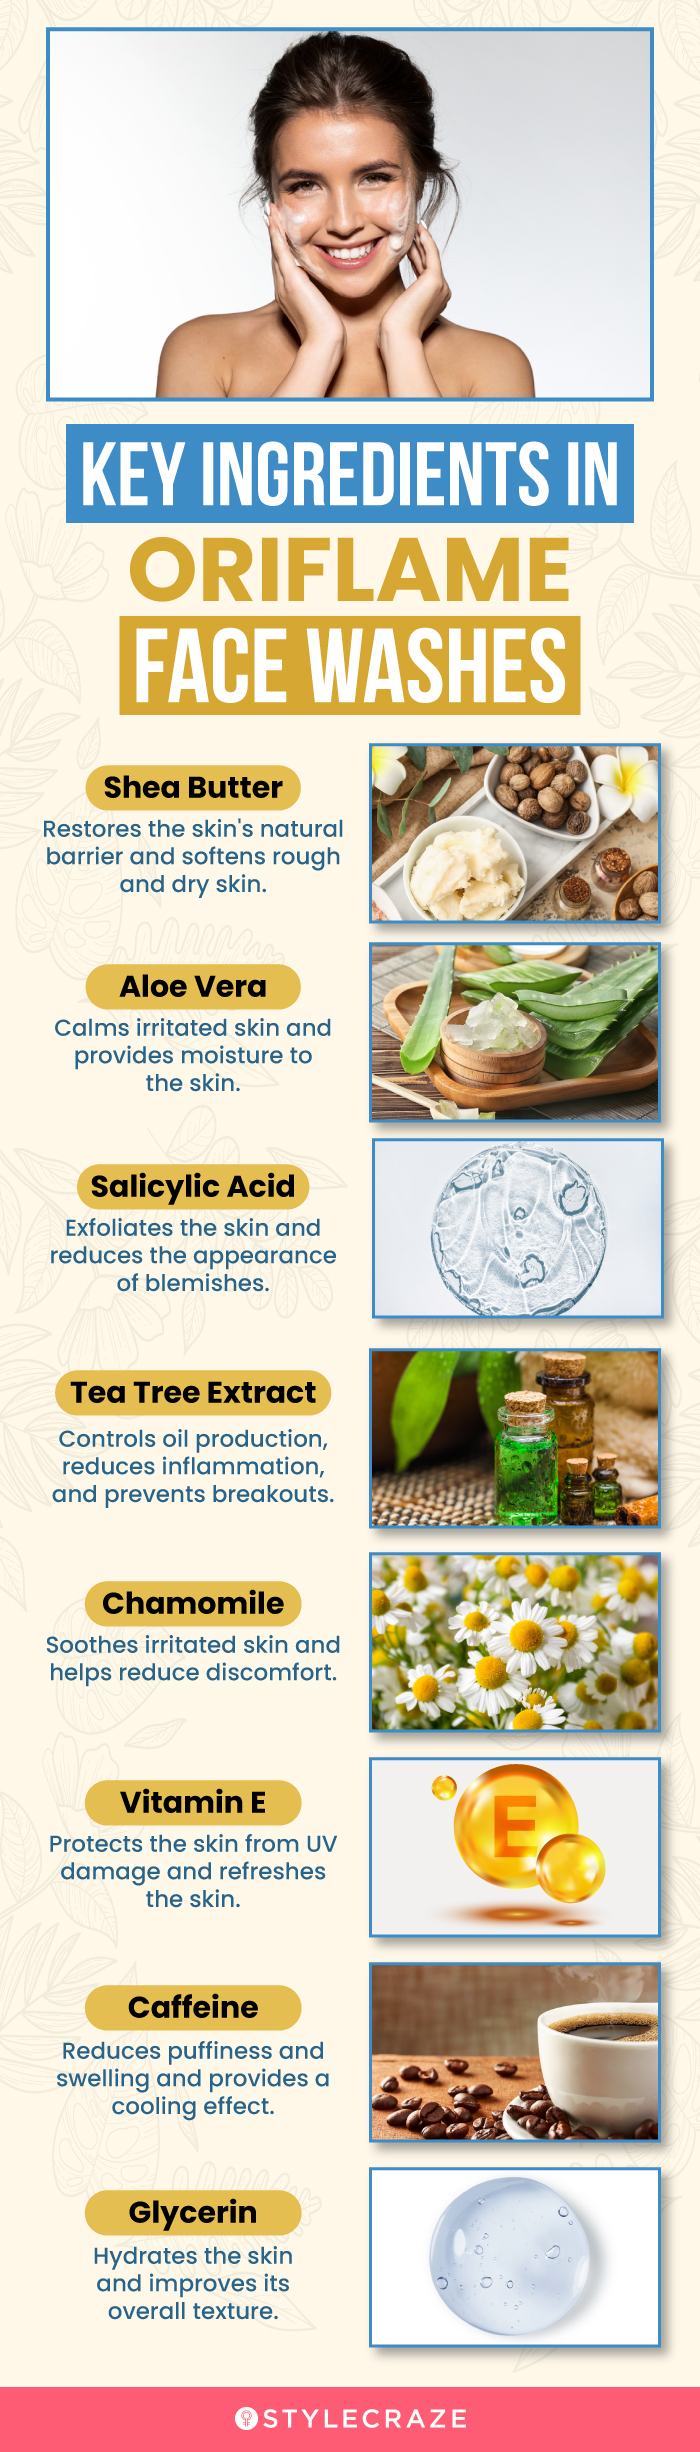 Key Ingredients In Oriflame Face Washes (infographic)